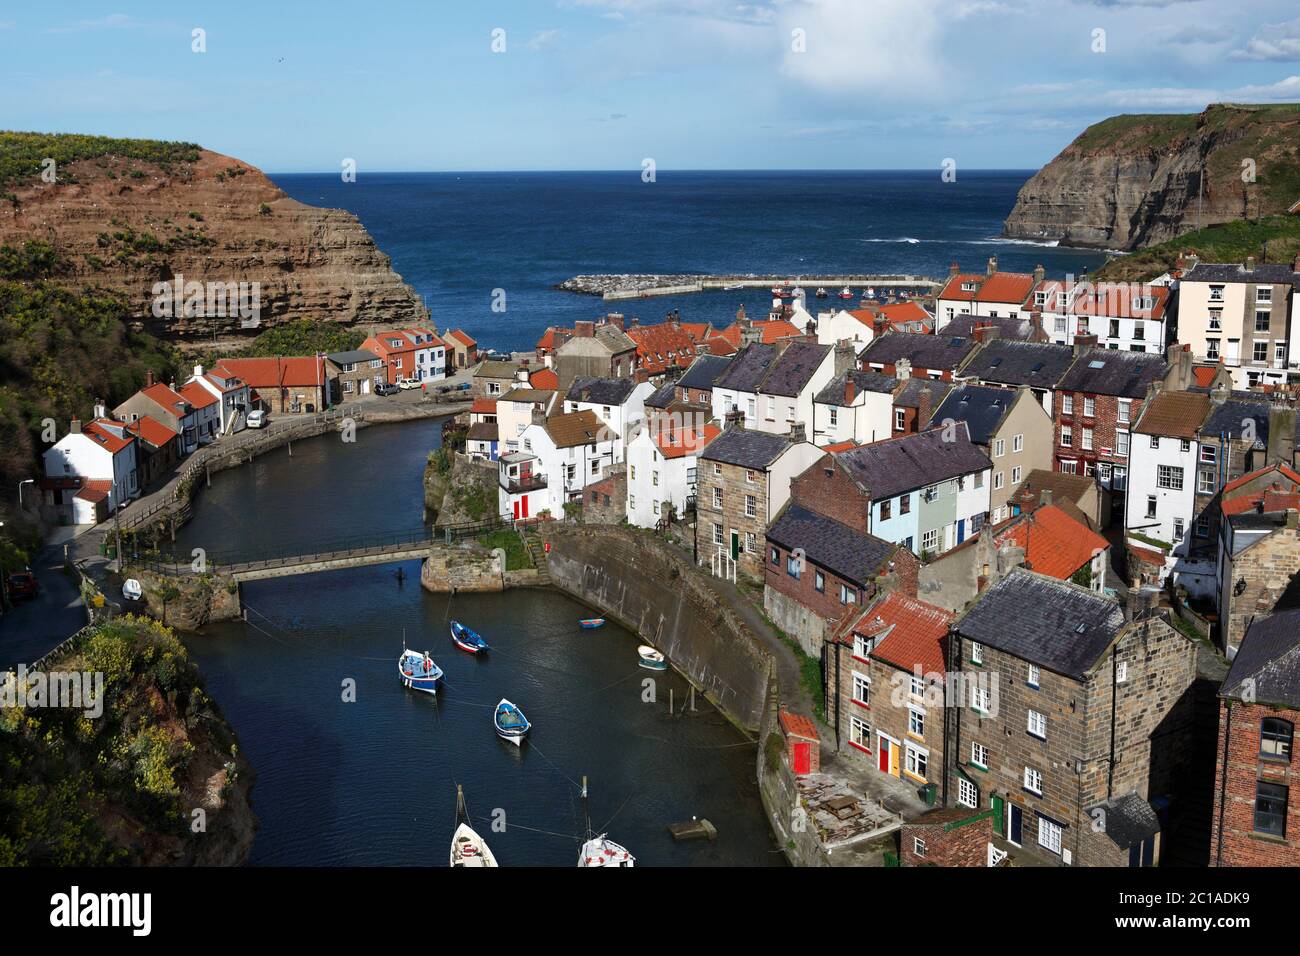 View over historic fishing village of Staithes on the north east coast, Staithes, North Yorkshire, England, United Kingdom, Europe Stock Photo